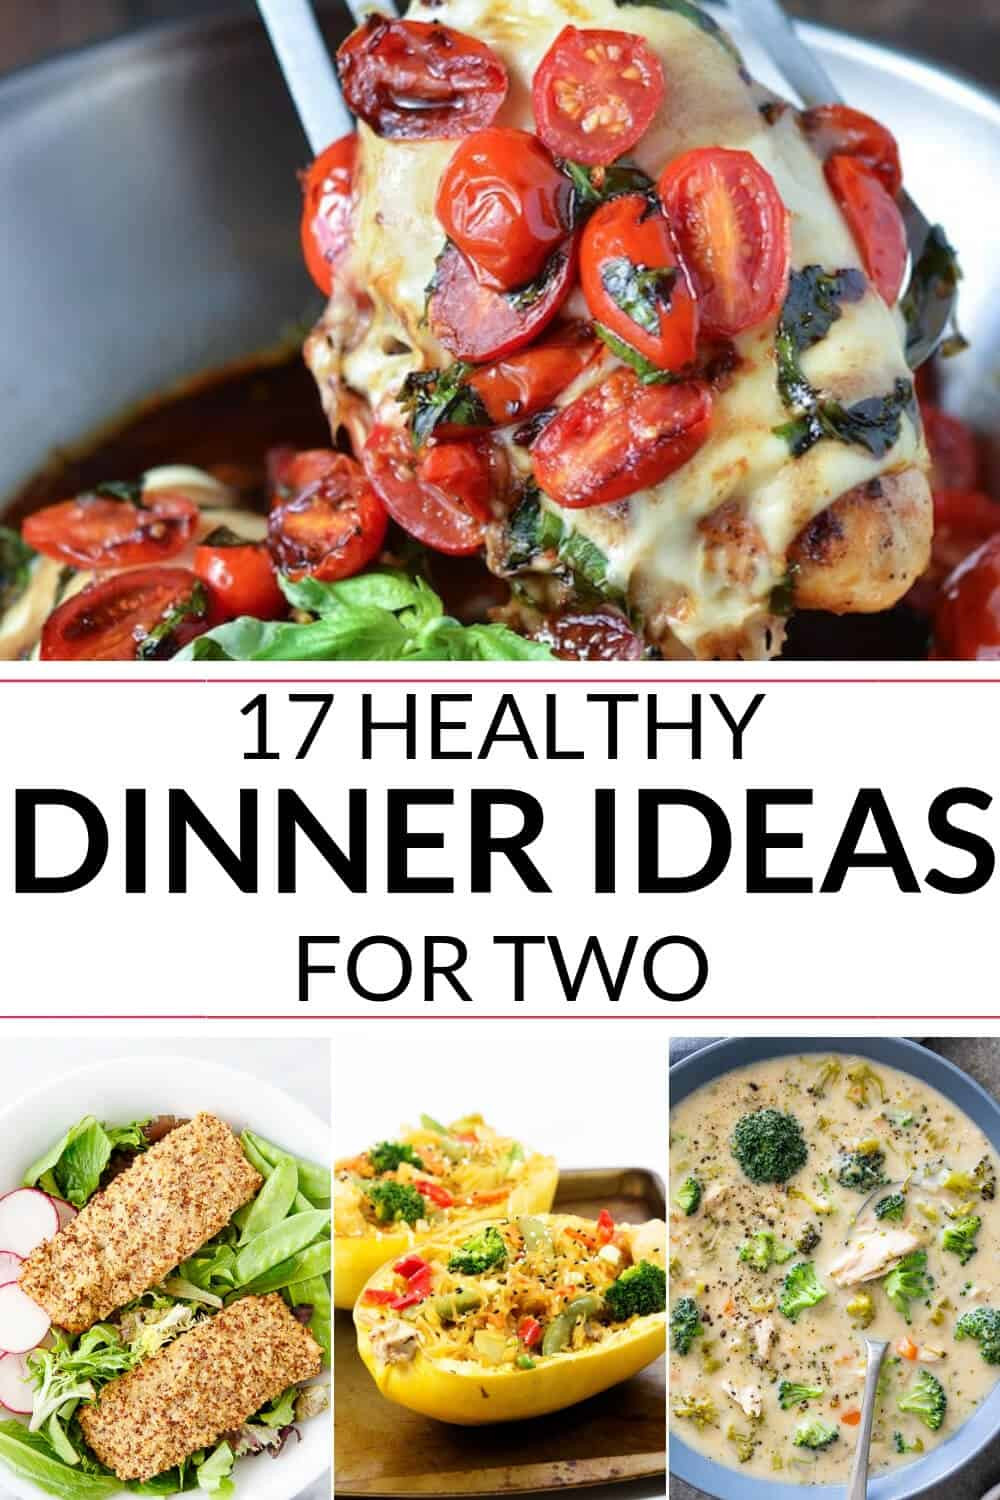 Healthy Dinner for Two Inspirational Healthy Dinner Ideas for Two